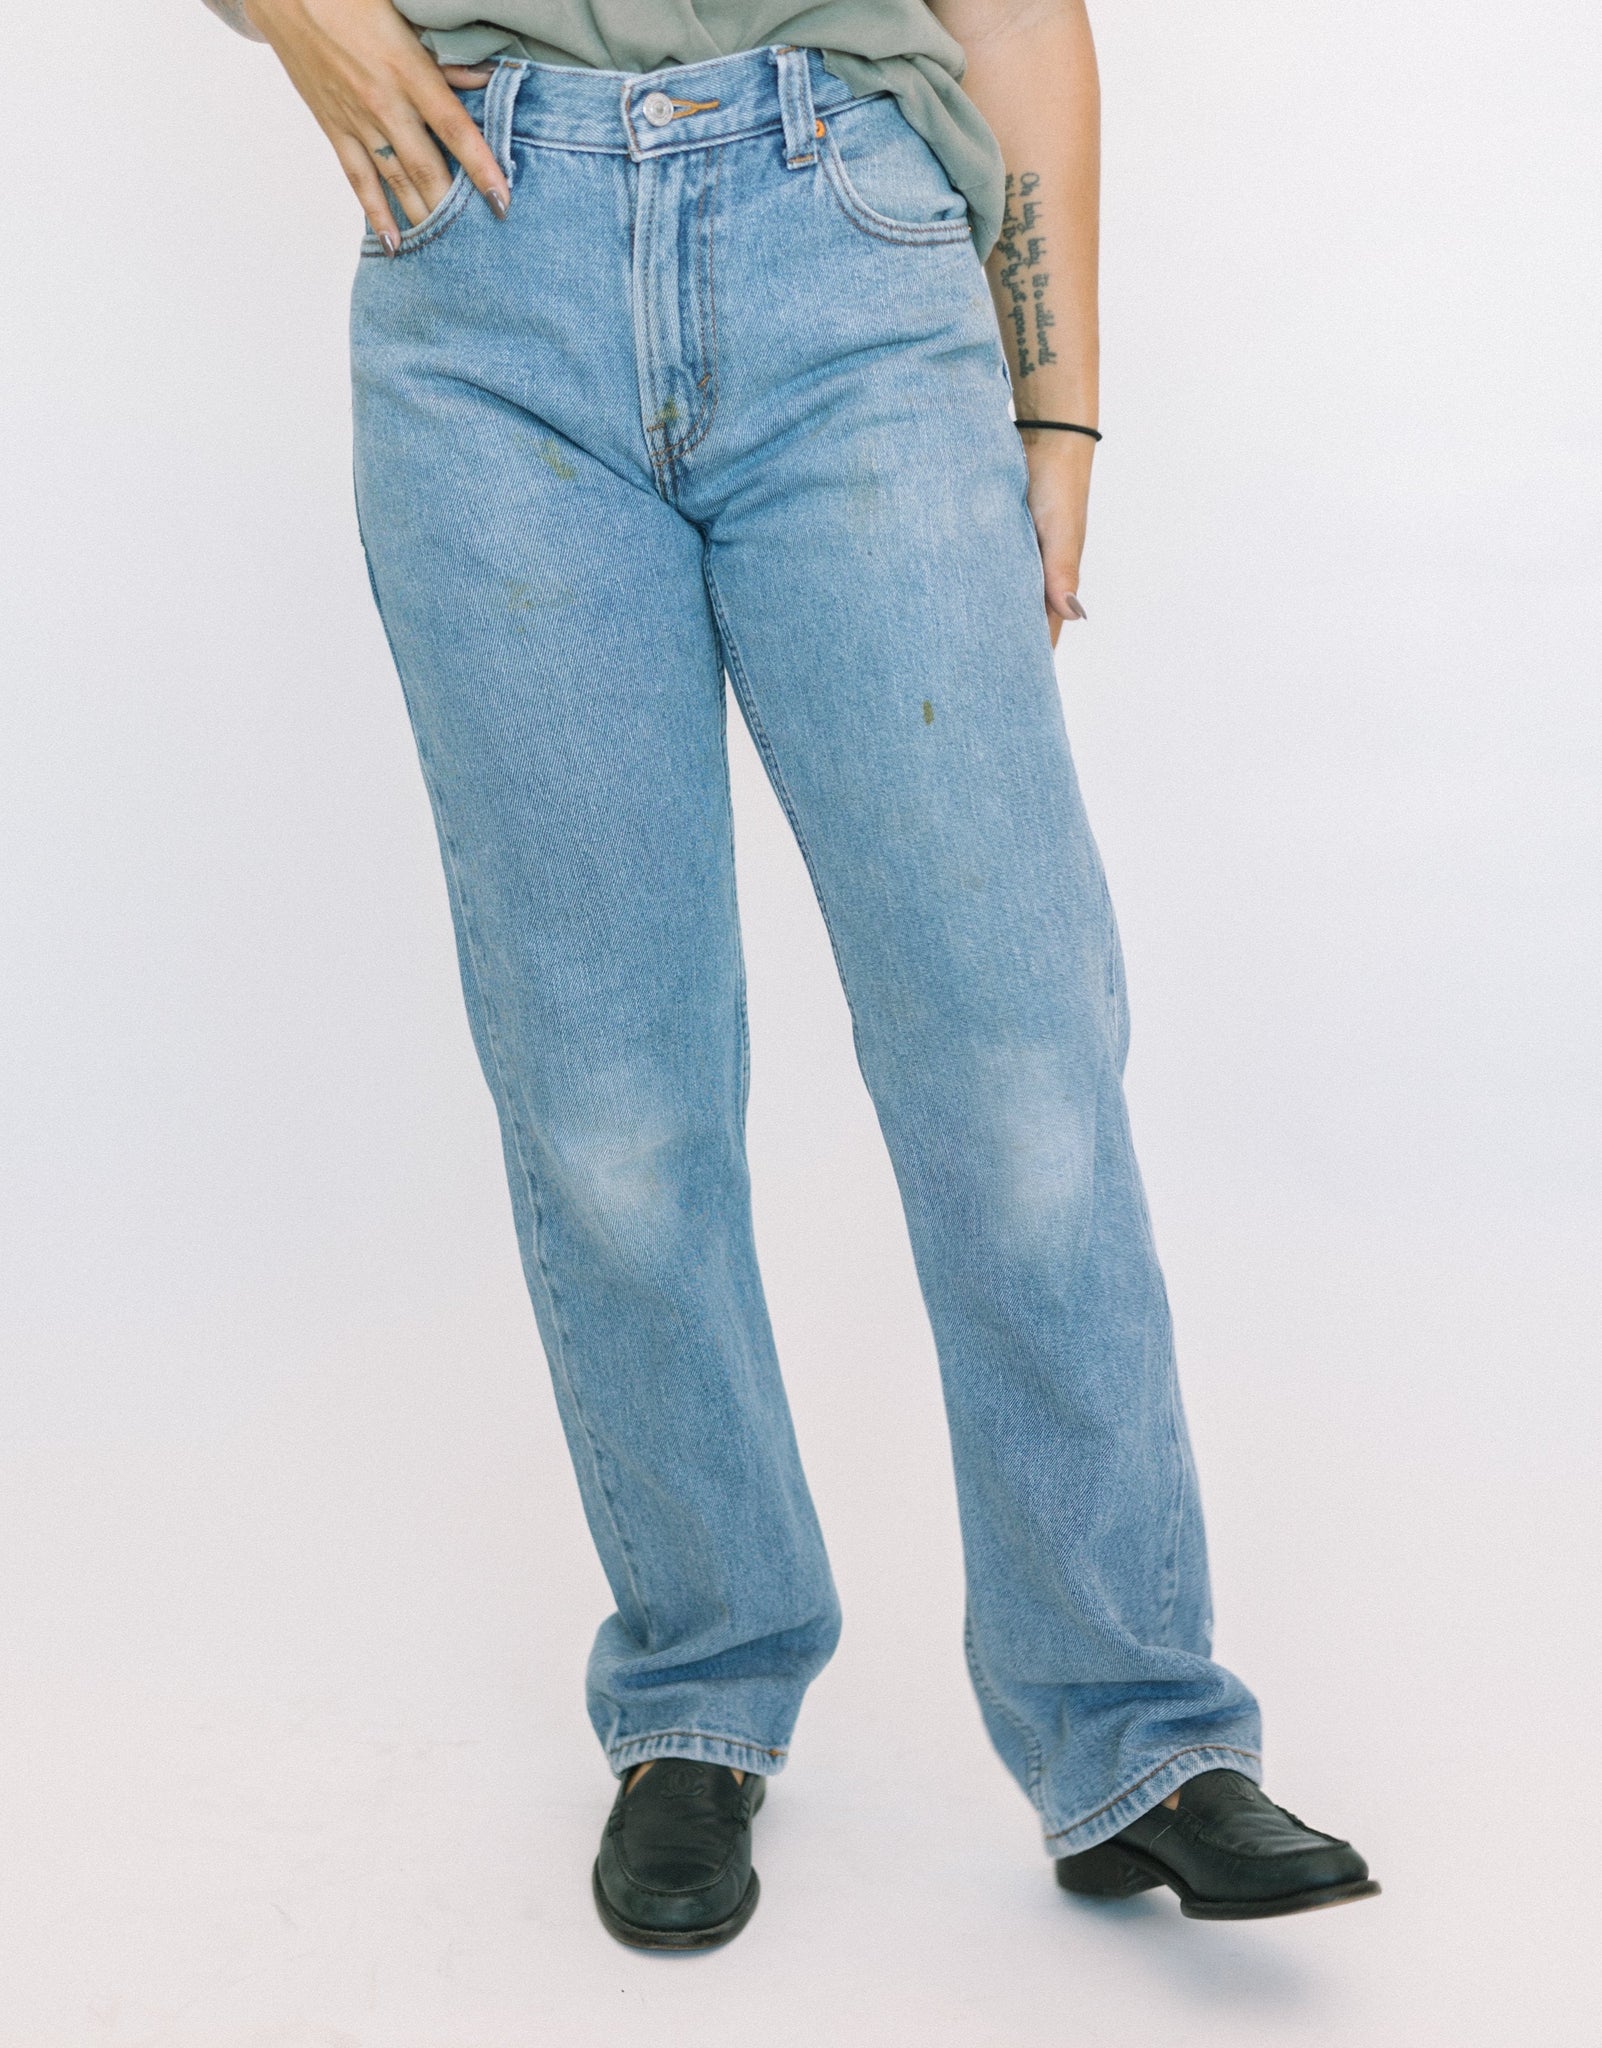 Levi's High Waisted 505 Regular Fit (25w)